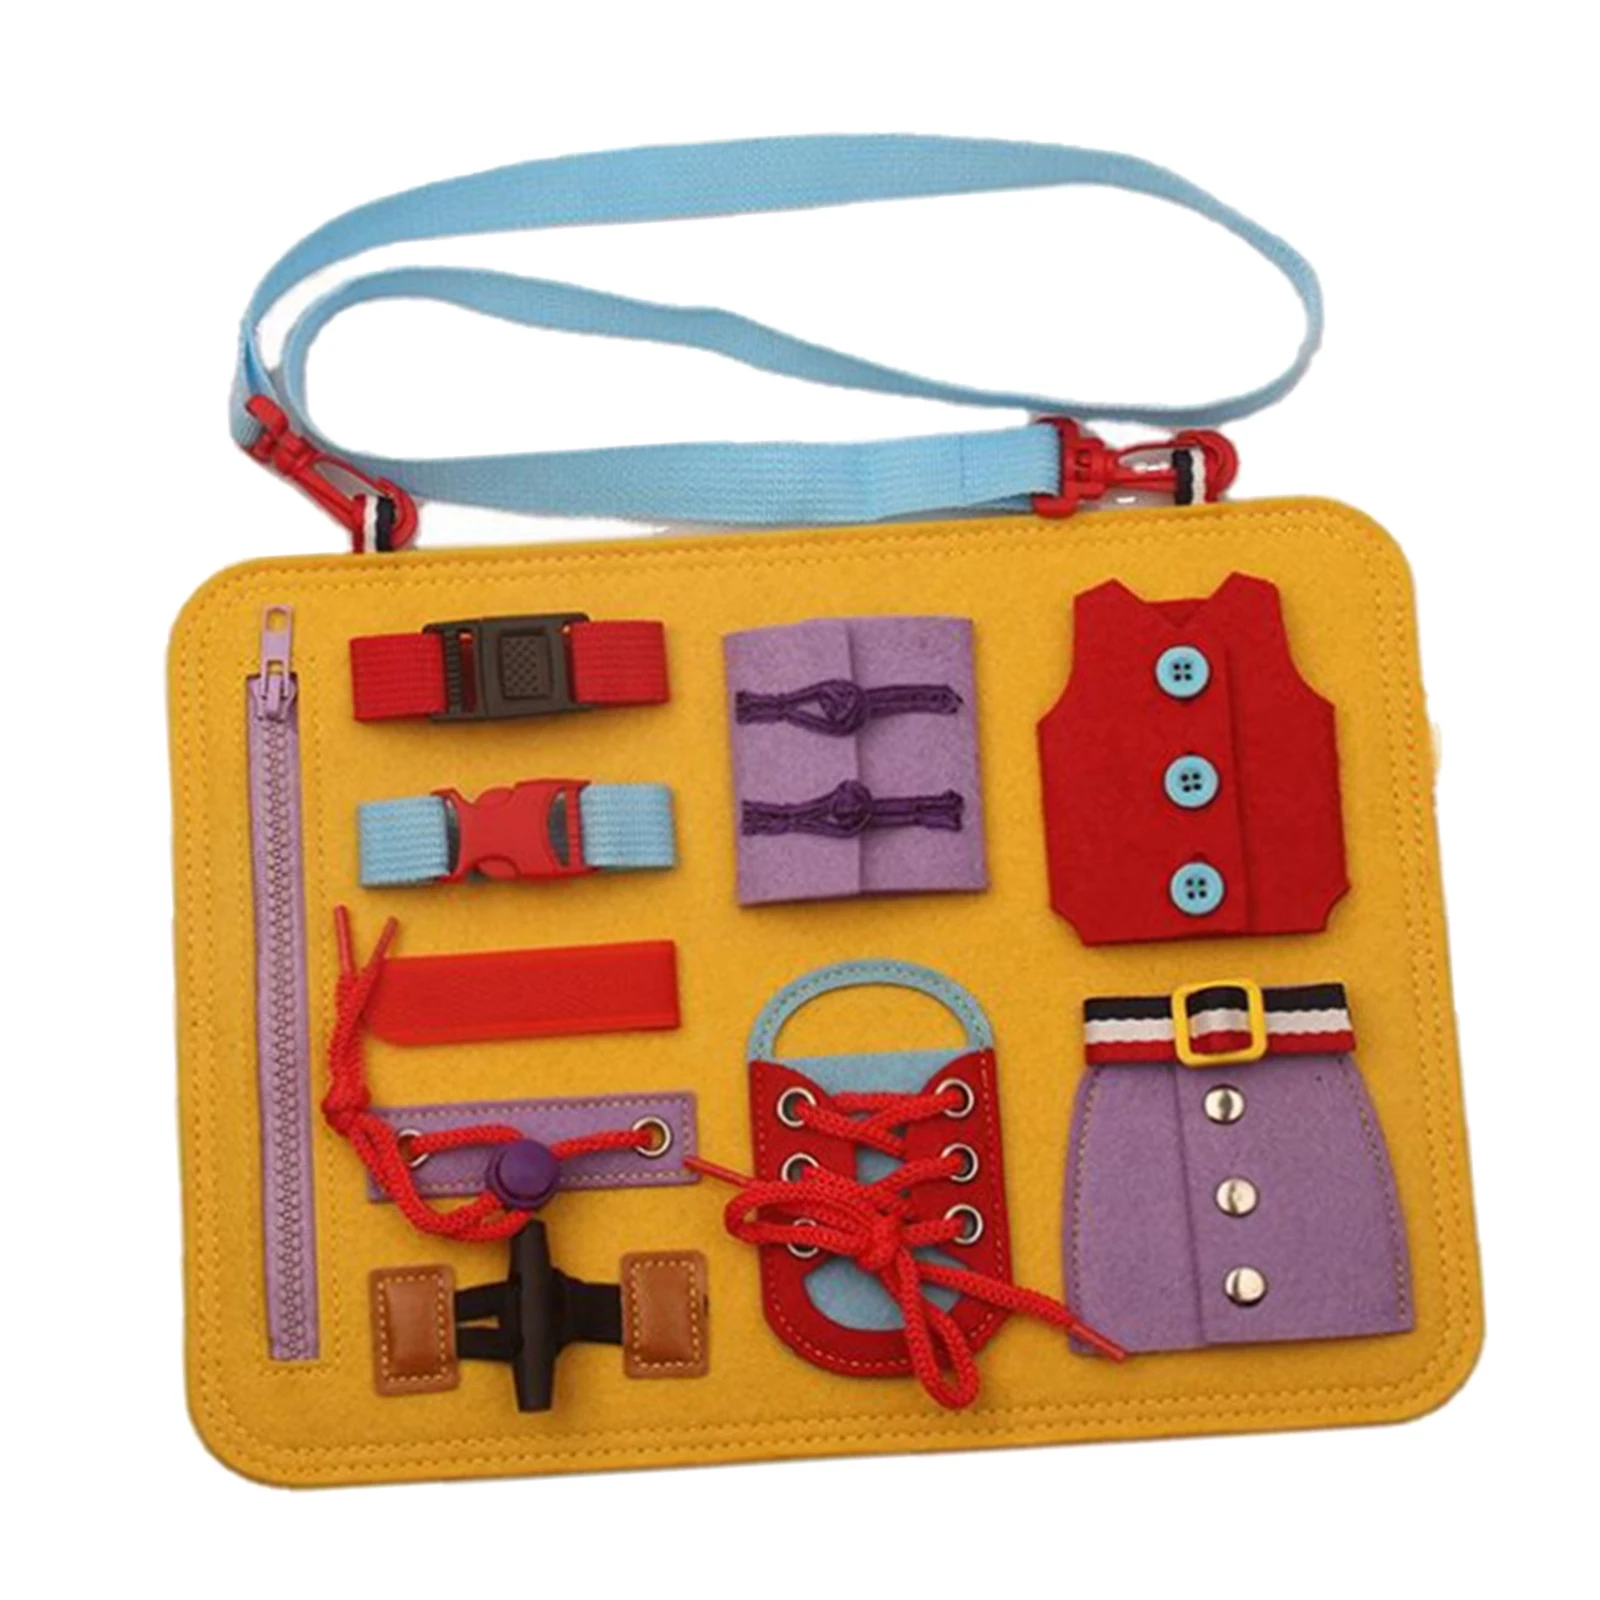 Button/Buckle/Zip/Lace Activity Board Kids Basic Life Skills Toy 